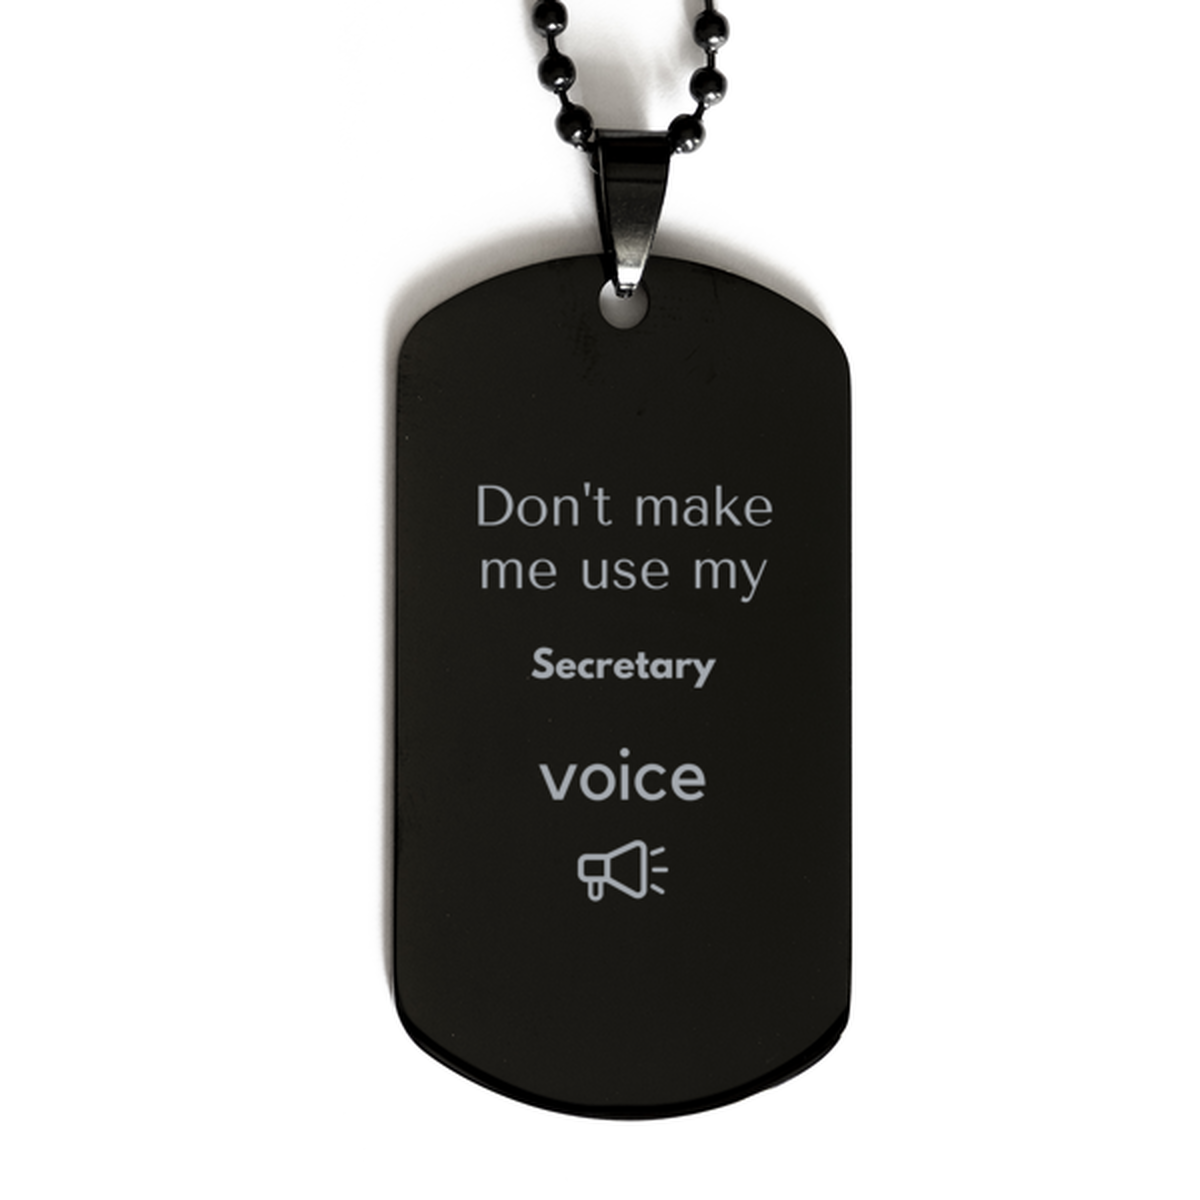 Don't make me use my Secretary voice, Sarcasm Secretary Gifts, Christmas Secretary Black Dog Tag Birthday Unique Gifts For Secretary Coworkers, Men, Women, Colleague, Friends